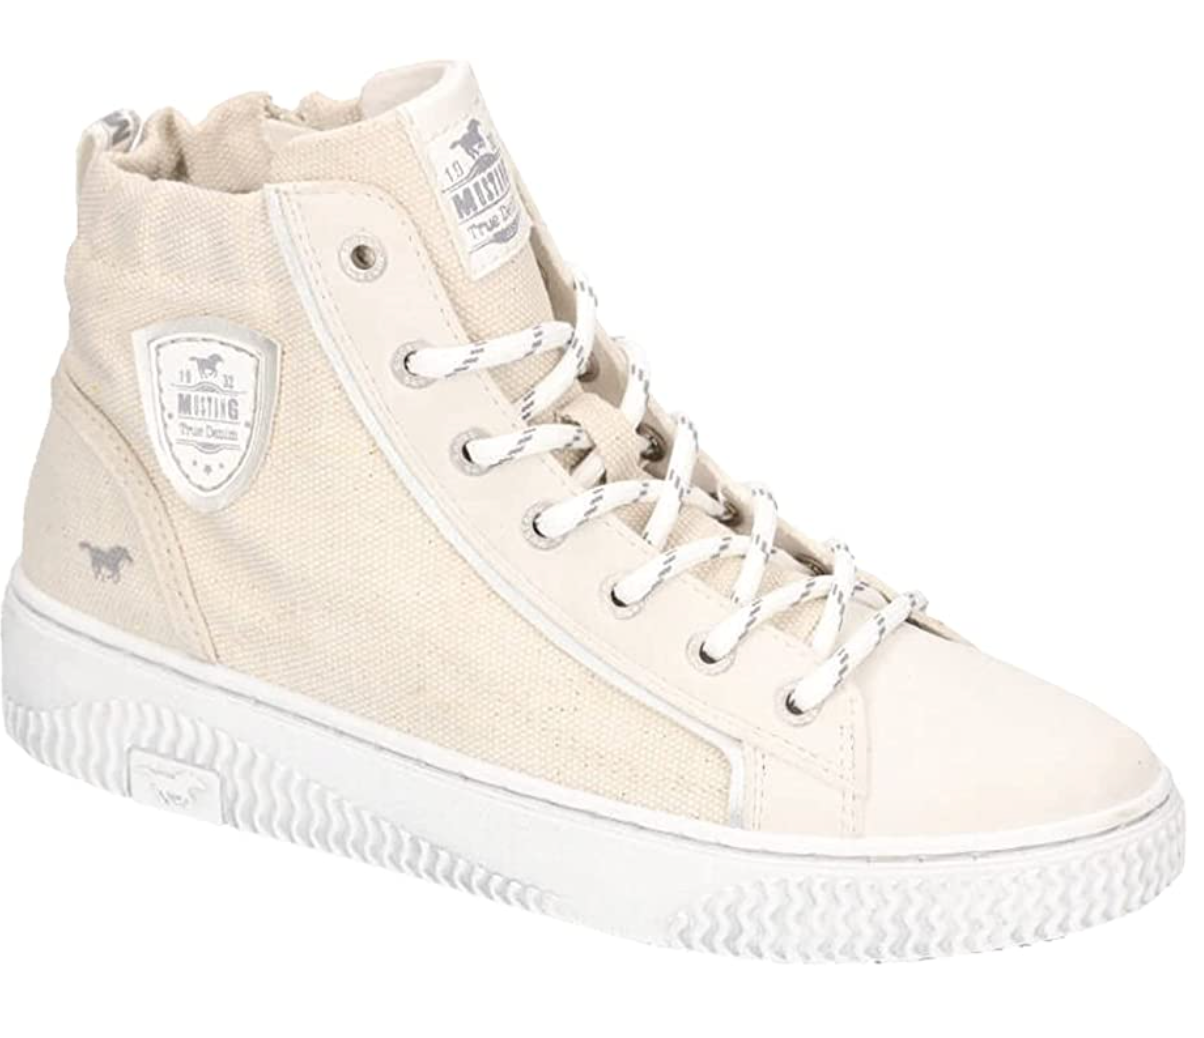 Mustang Womens High Top Fashion Trainers - Off-White